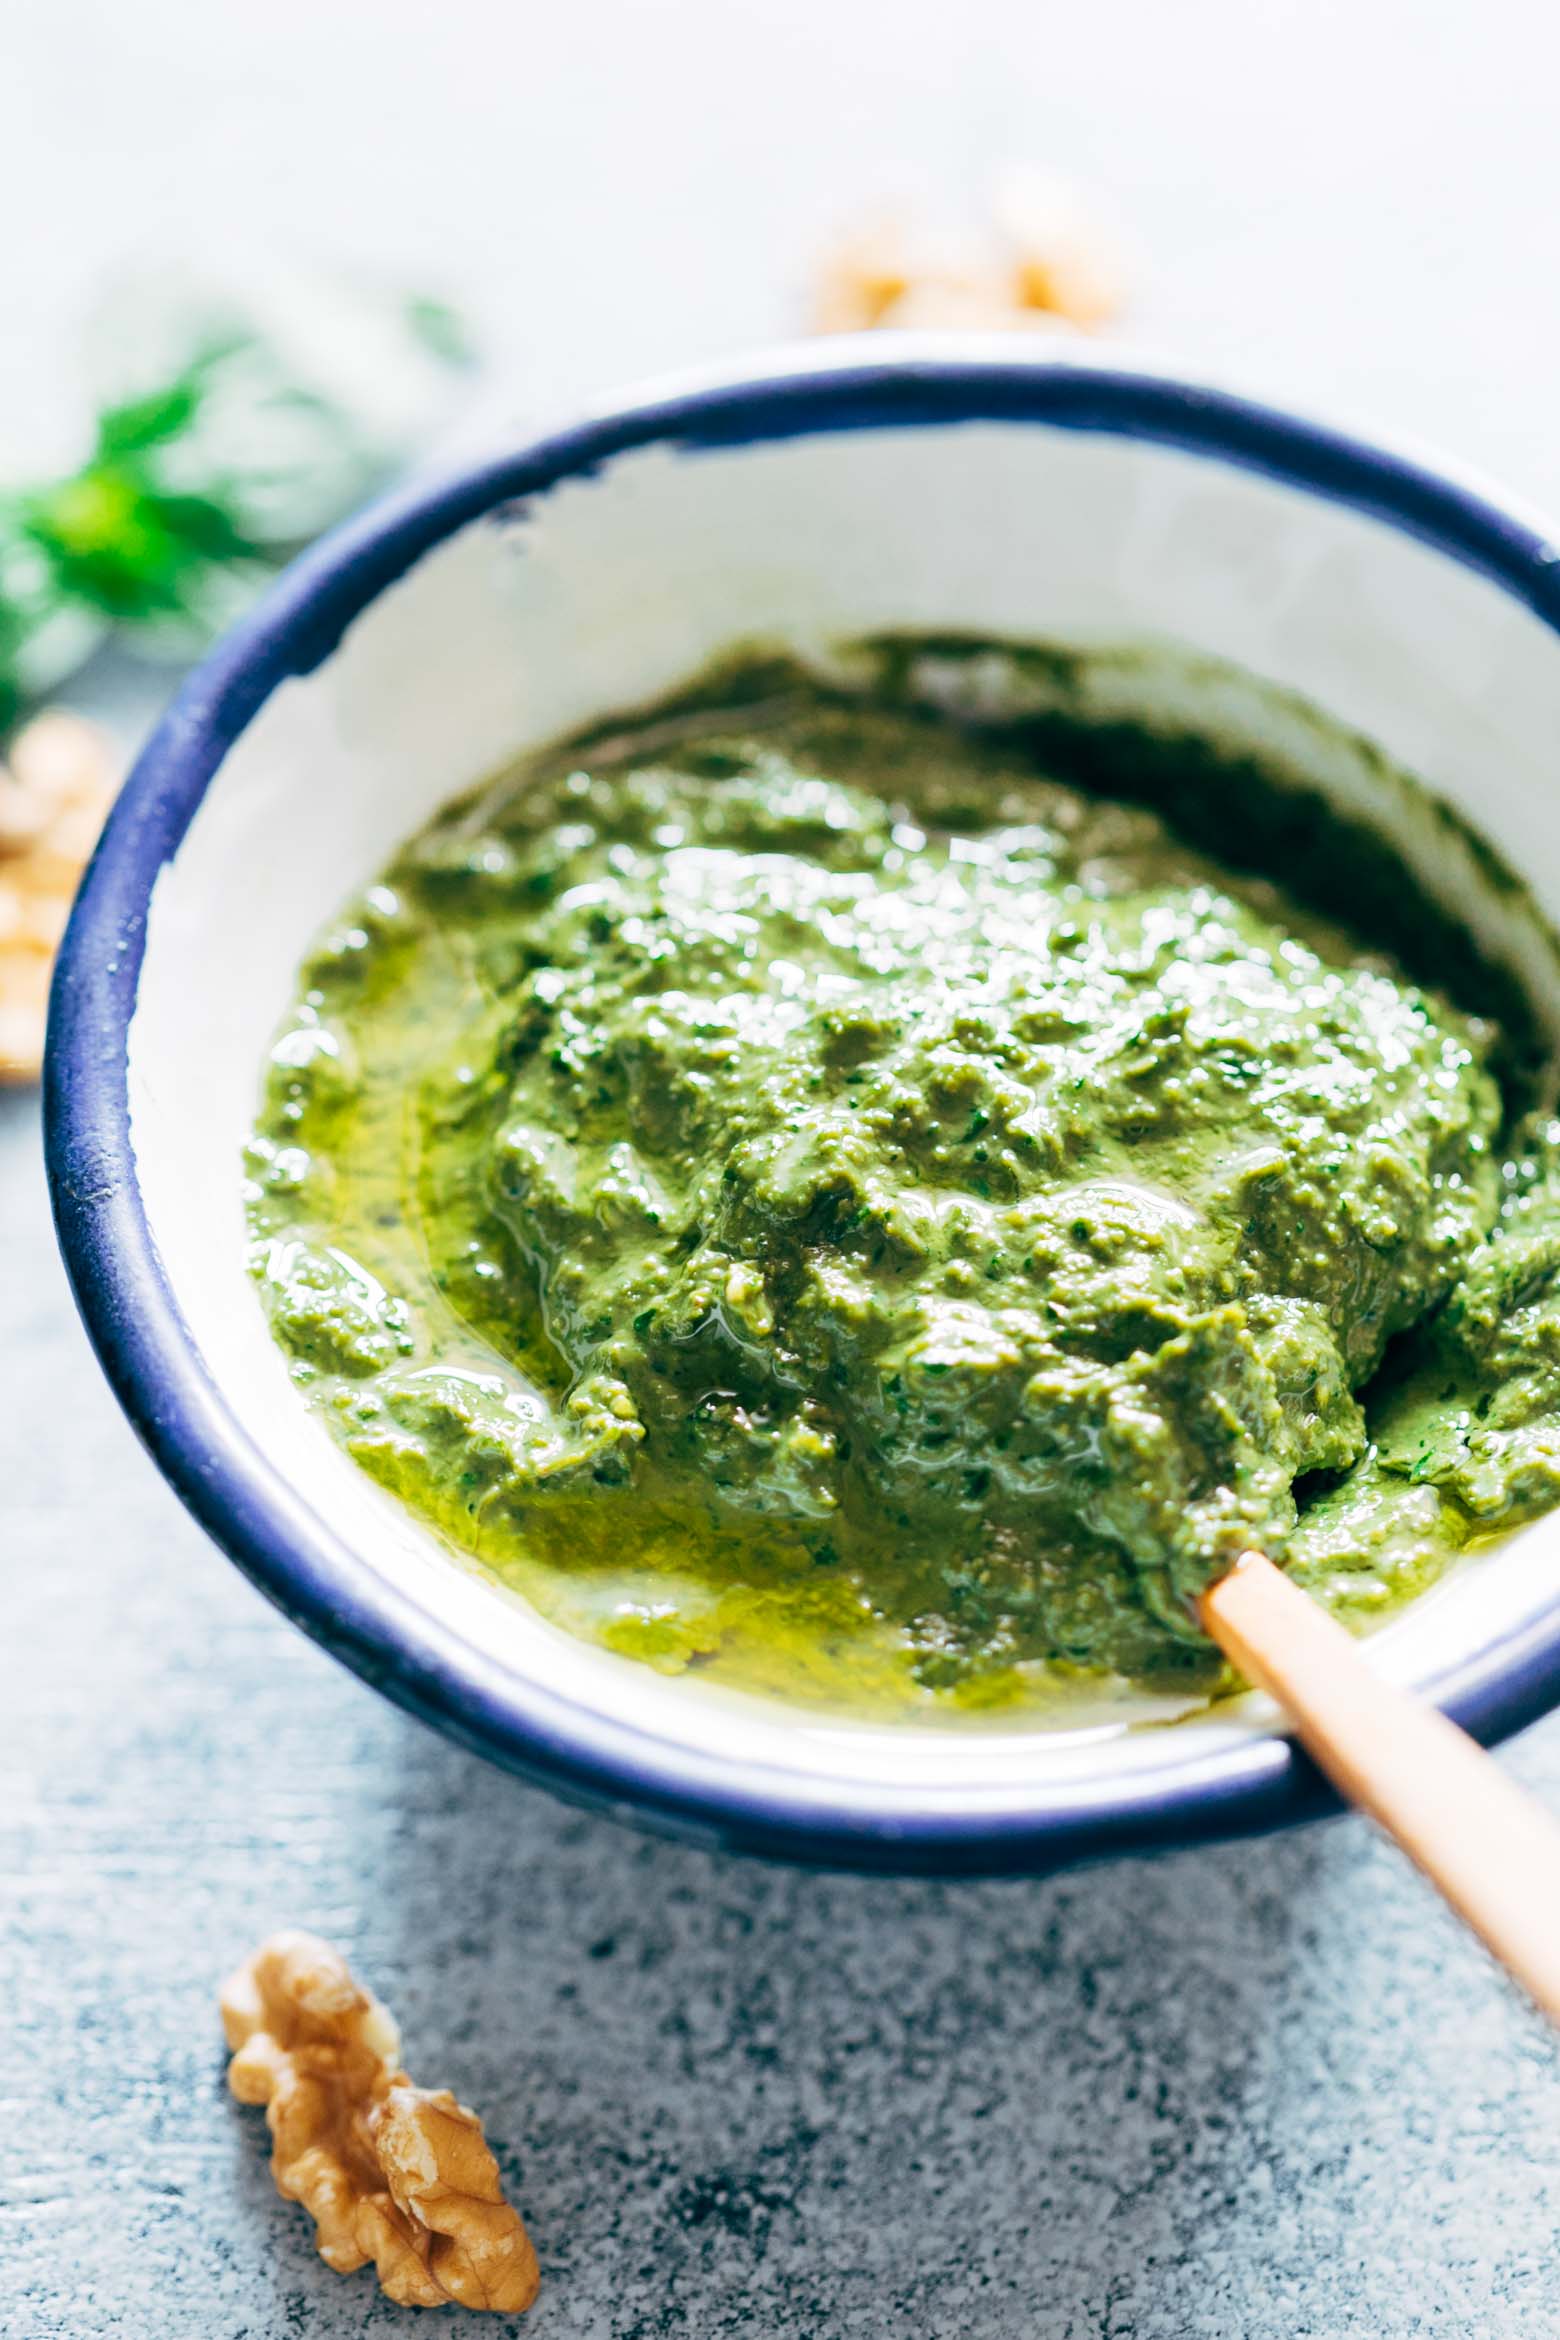 Basil Walnut Pesto is a super easy, homemade vegan pesto recipe that is perfect with pasta dishes, salads, on chicken and salmon as a sauce or even as a dip! The walnuts give it a creamy base which helps avoid the parmesan altogether, and are a great substitute to pine nuts. 